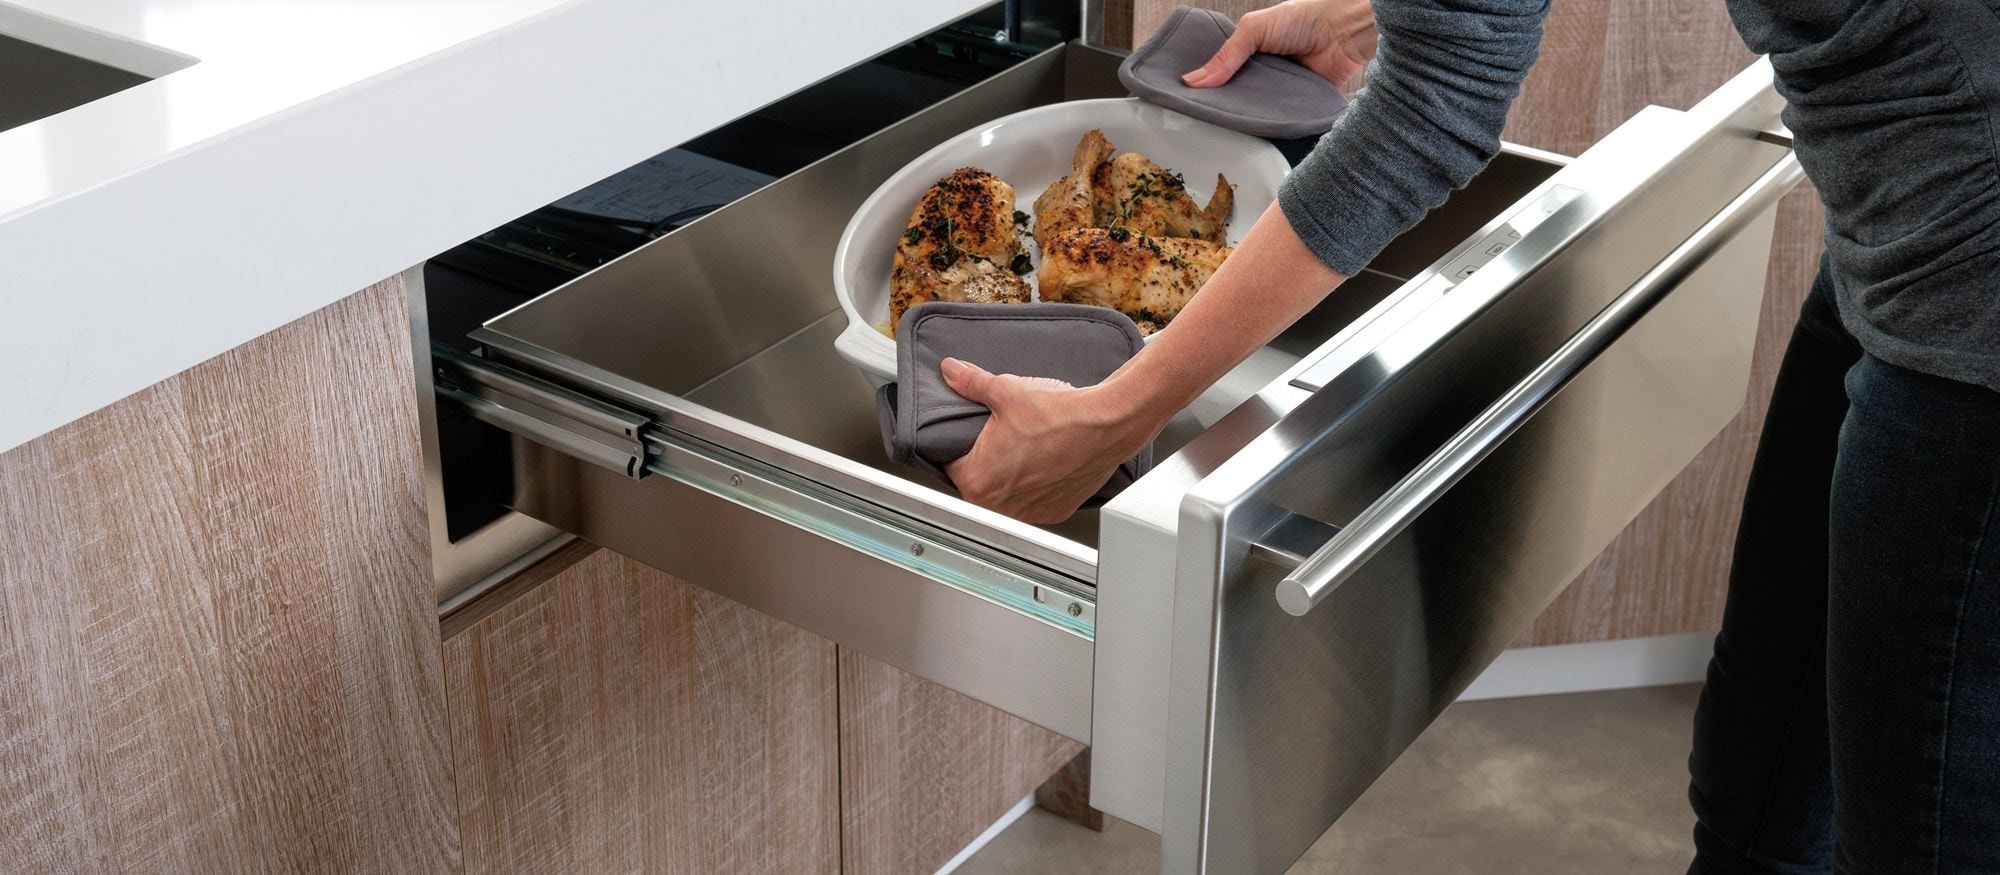 What temperature should a warming drawer be?